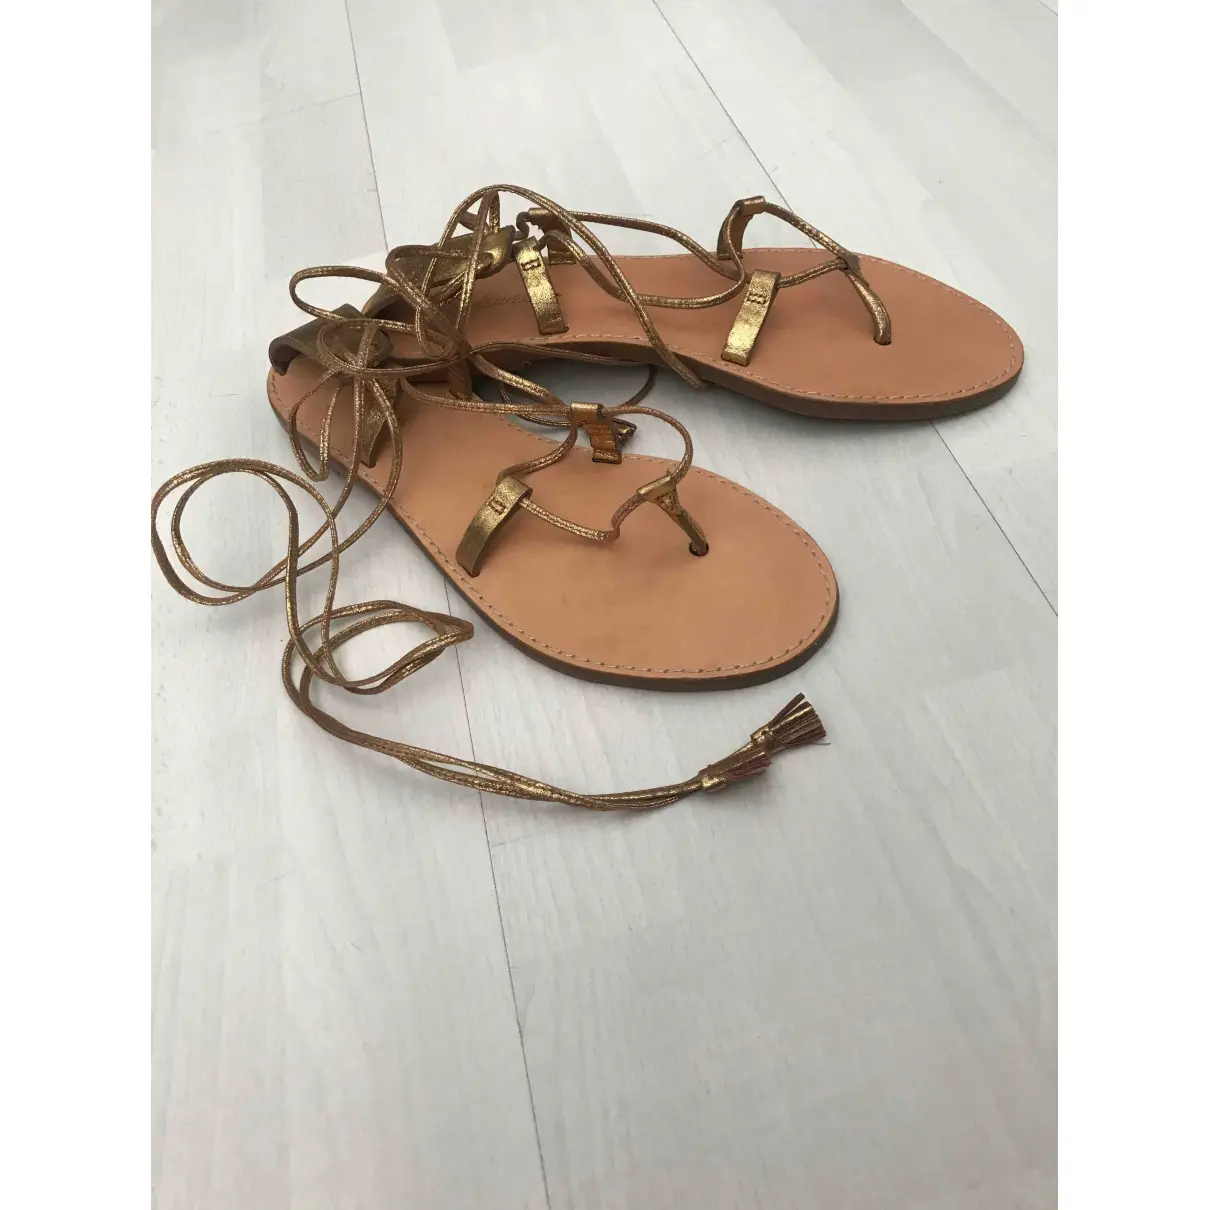 Buy Madewell Leather sandal online